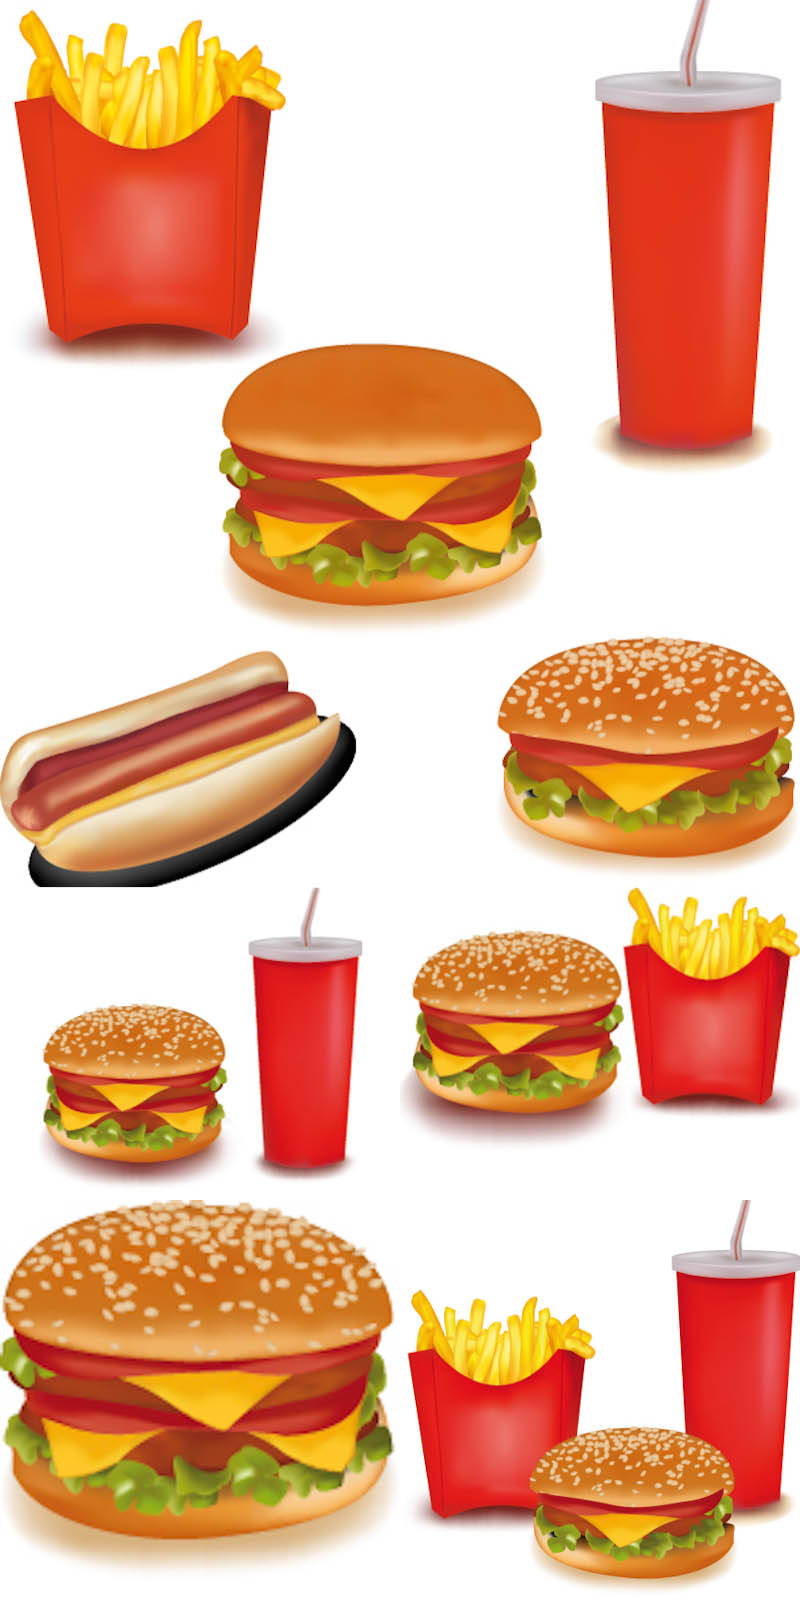 food | Free Stock Vector Art  Illustrations, EPS, AI, SVG, CDR 